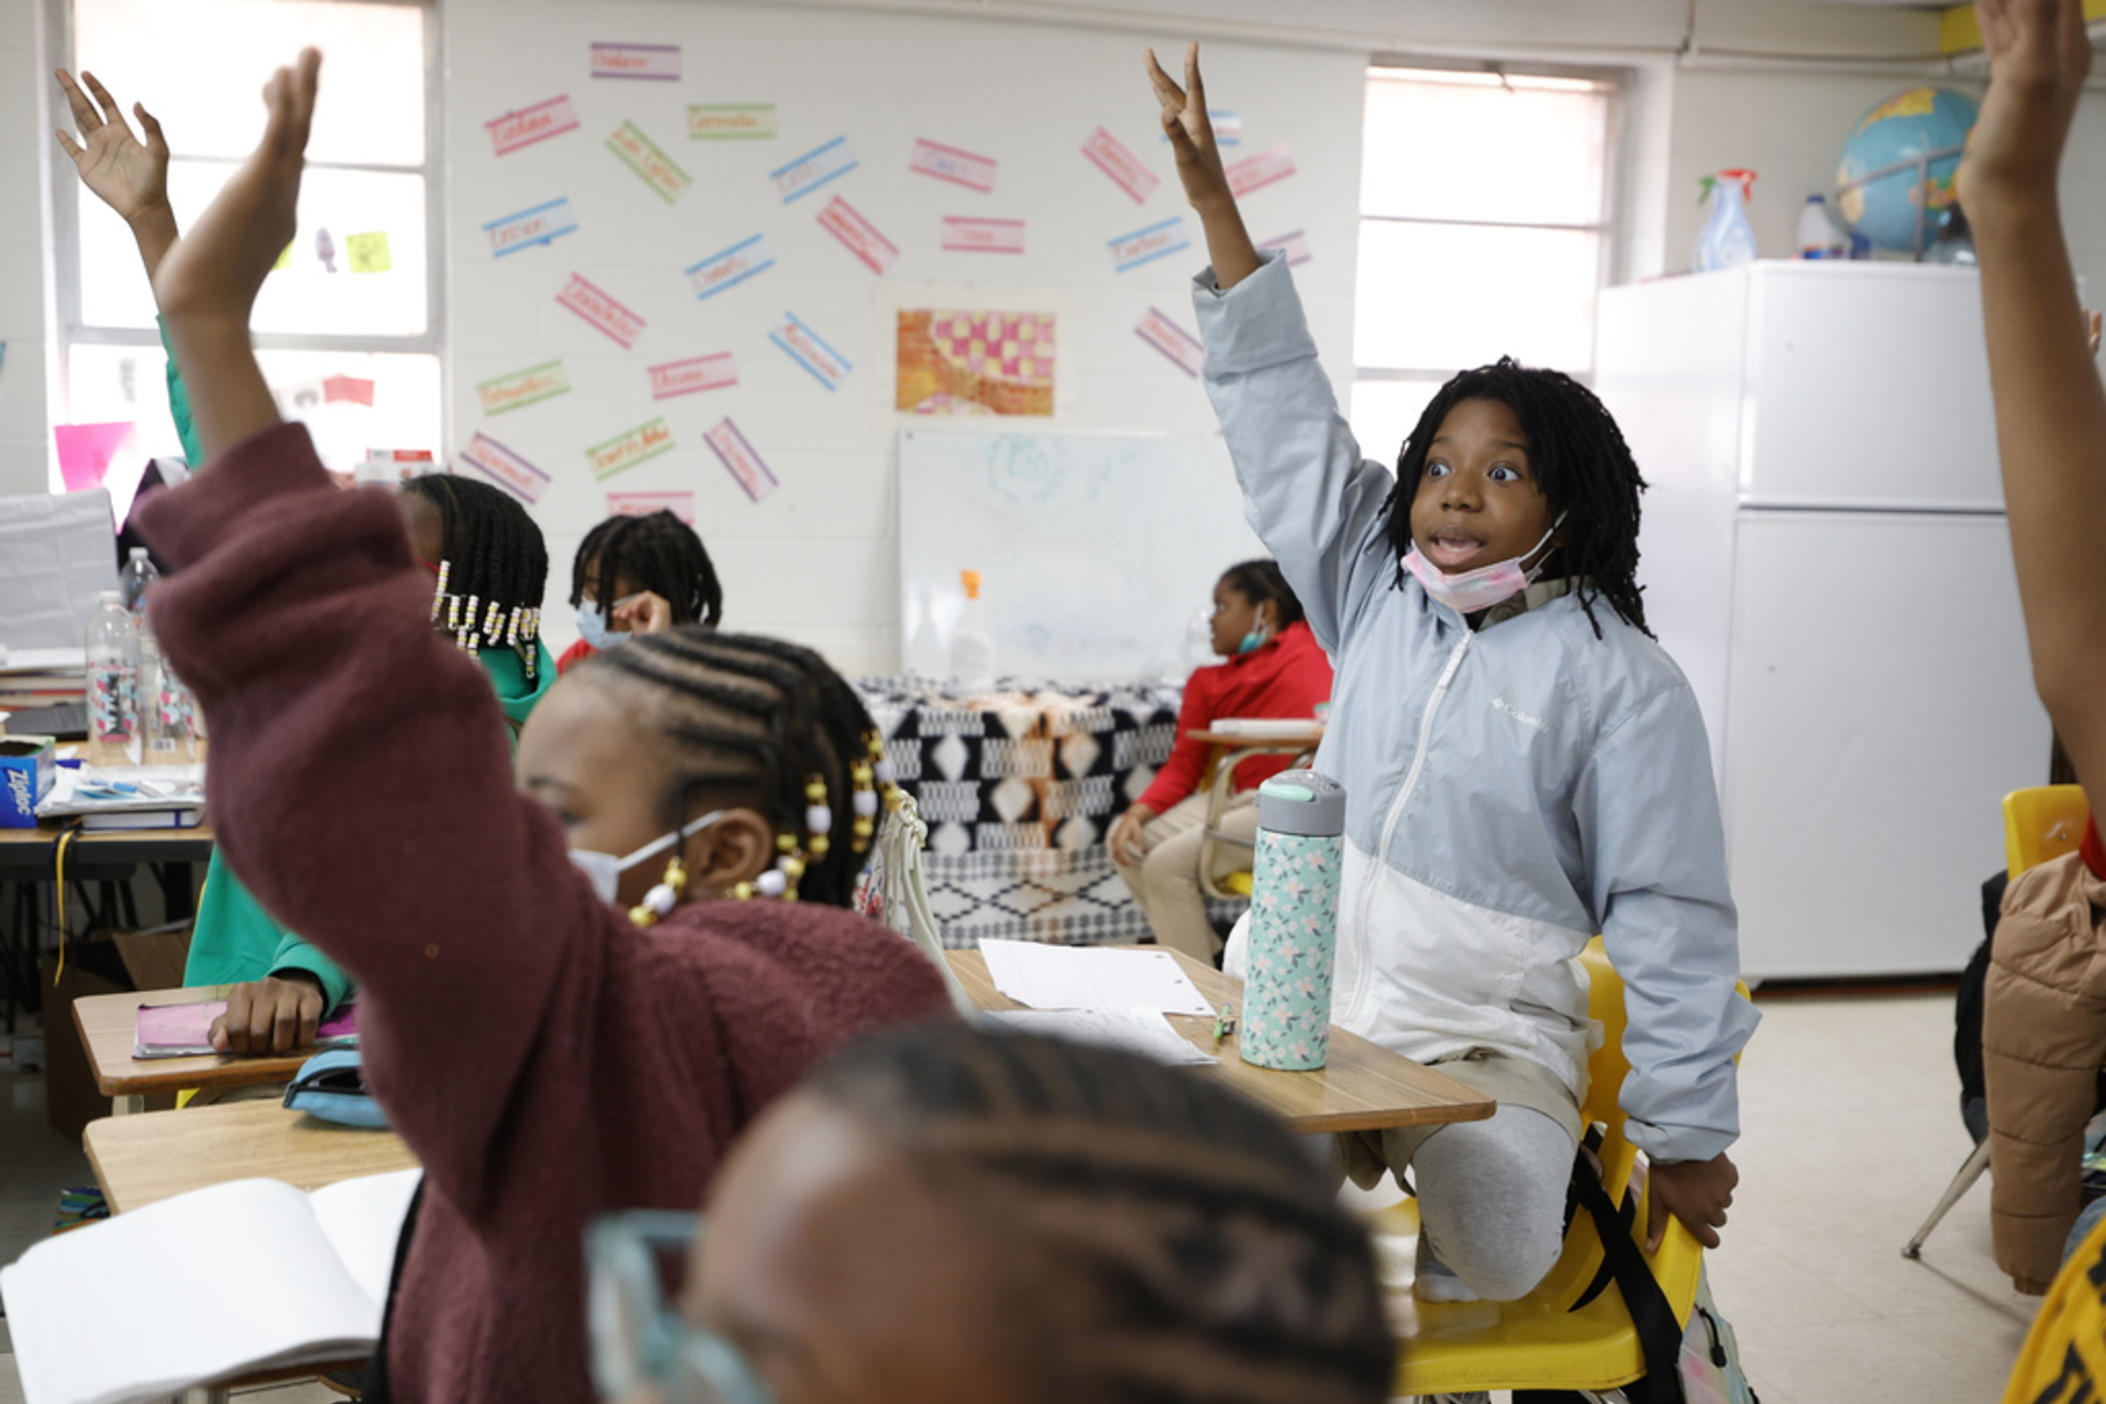 Zeniyha Howard, 10, of Decatur, Ga., raises their hand during a math lesson at the Kilombo Academic and Cultural Institute, Tuesday, March 28, 2023, in Decatur, Ga. 